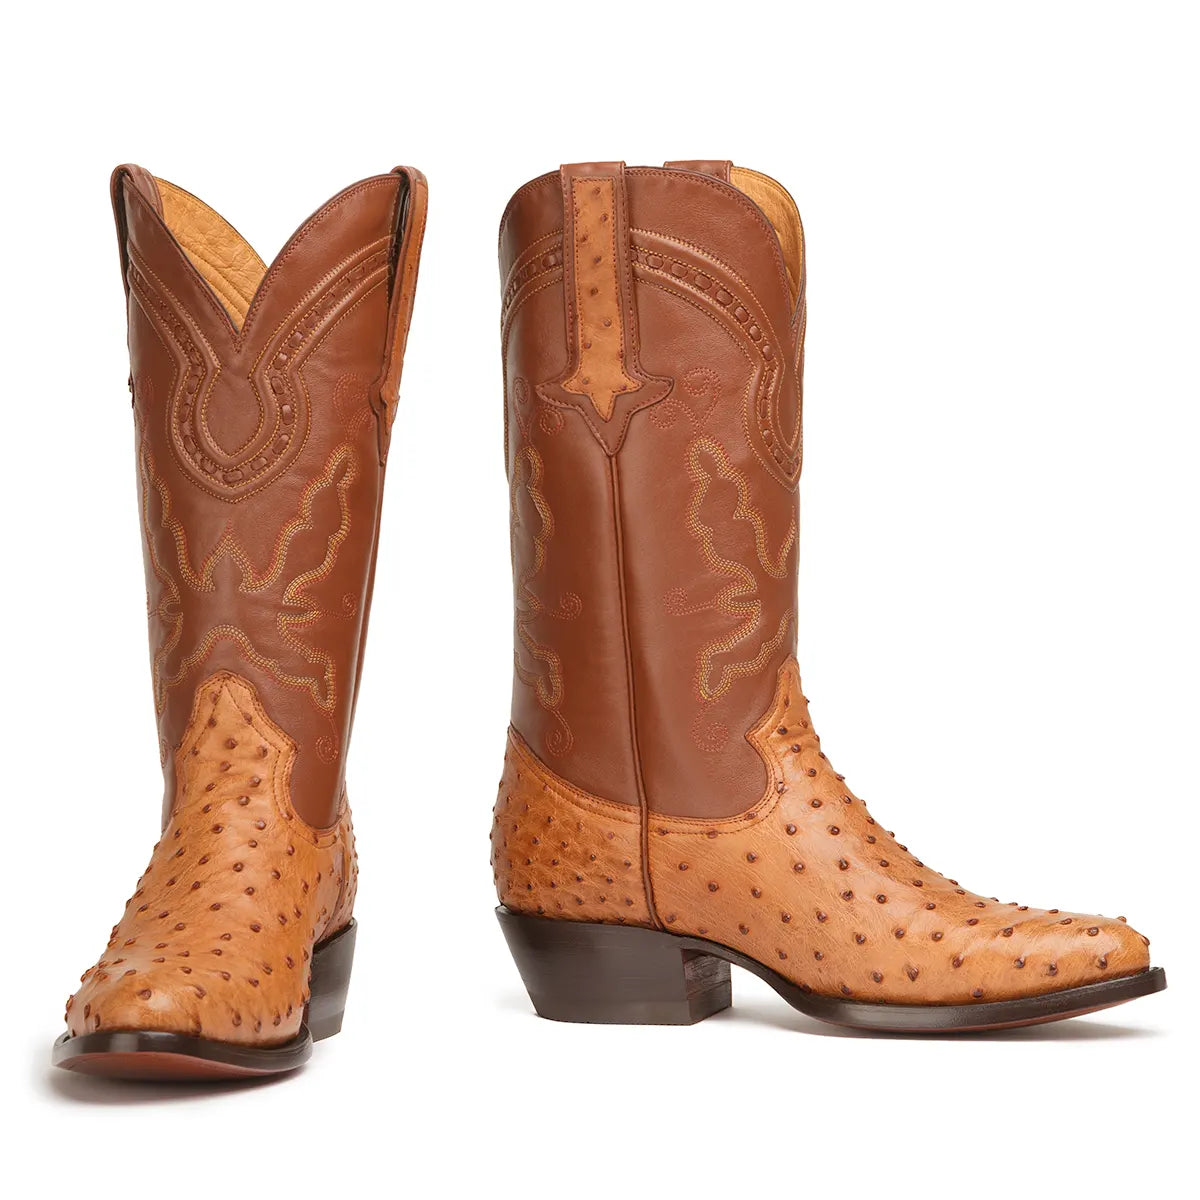 Cameron Full Quill Ostrich Classic Western Boot - Cognac